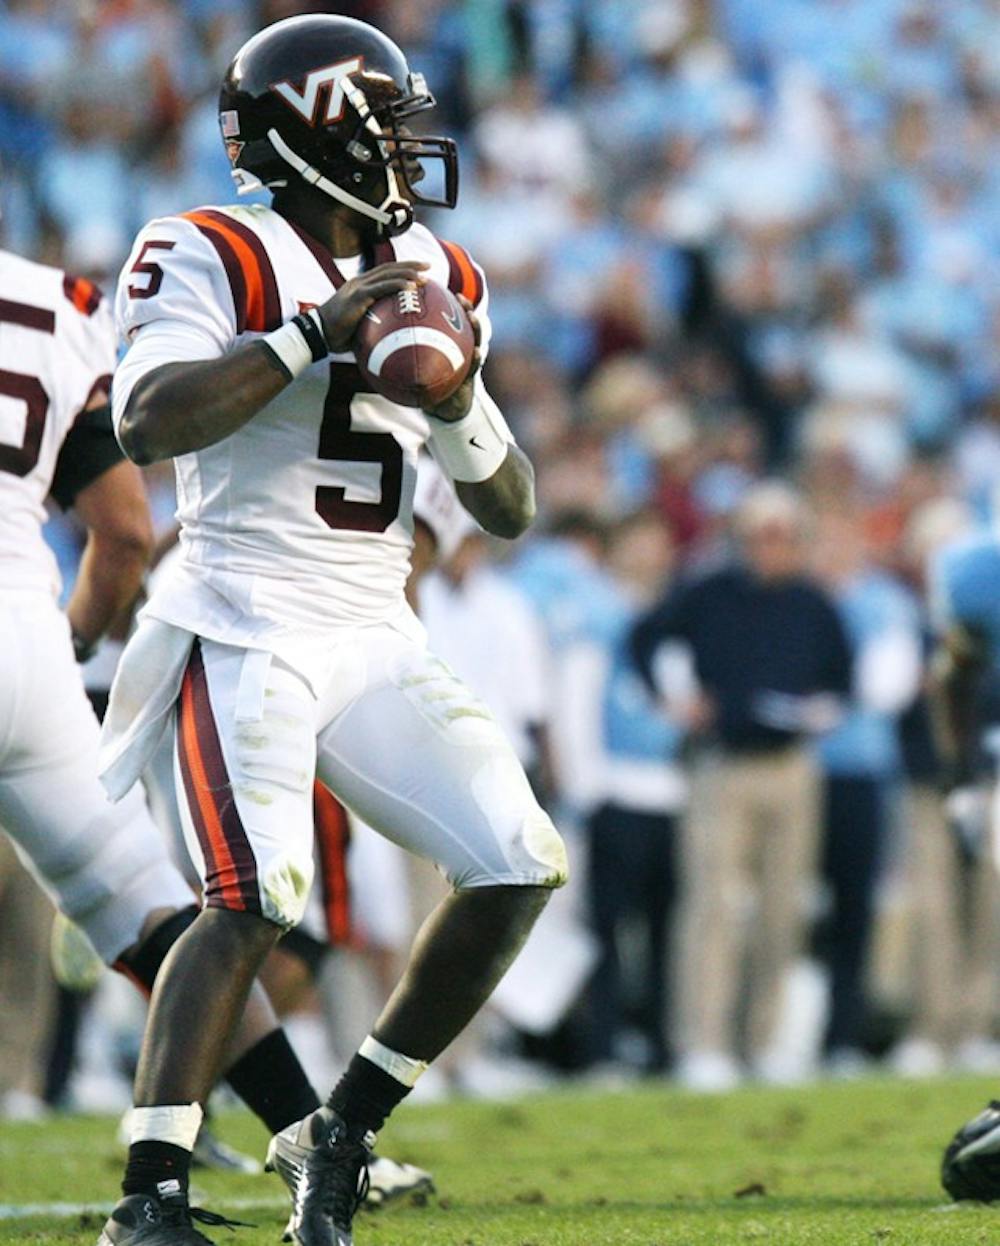 Virginia Tech senior quarterback Tyrod Taylor takes his time in the pocket during the Saturday game against the Tar Heels.